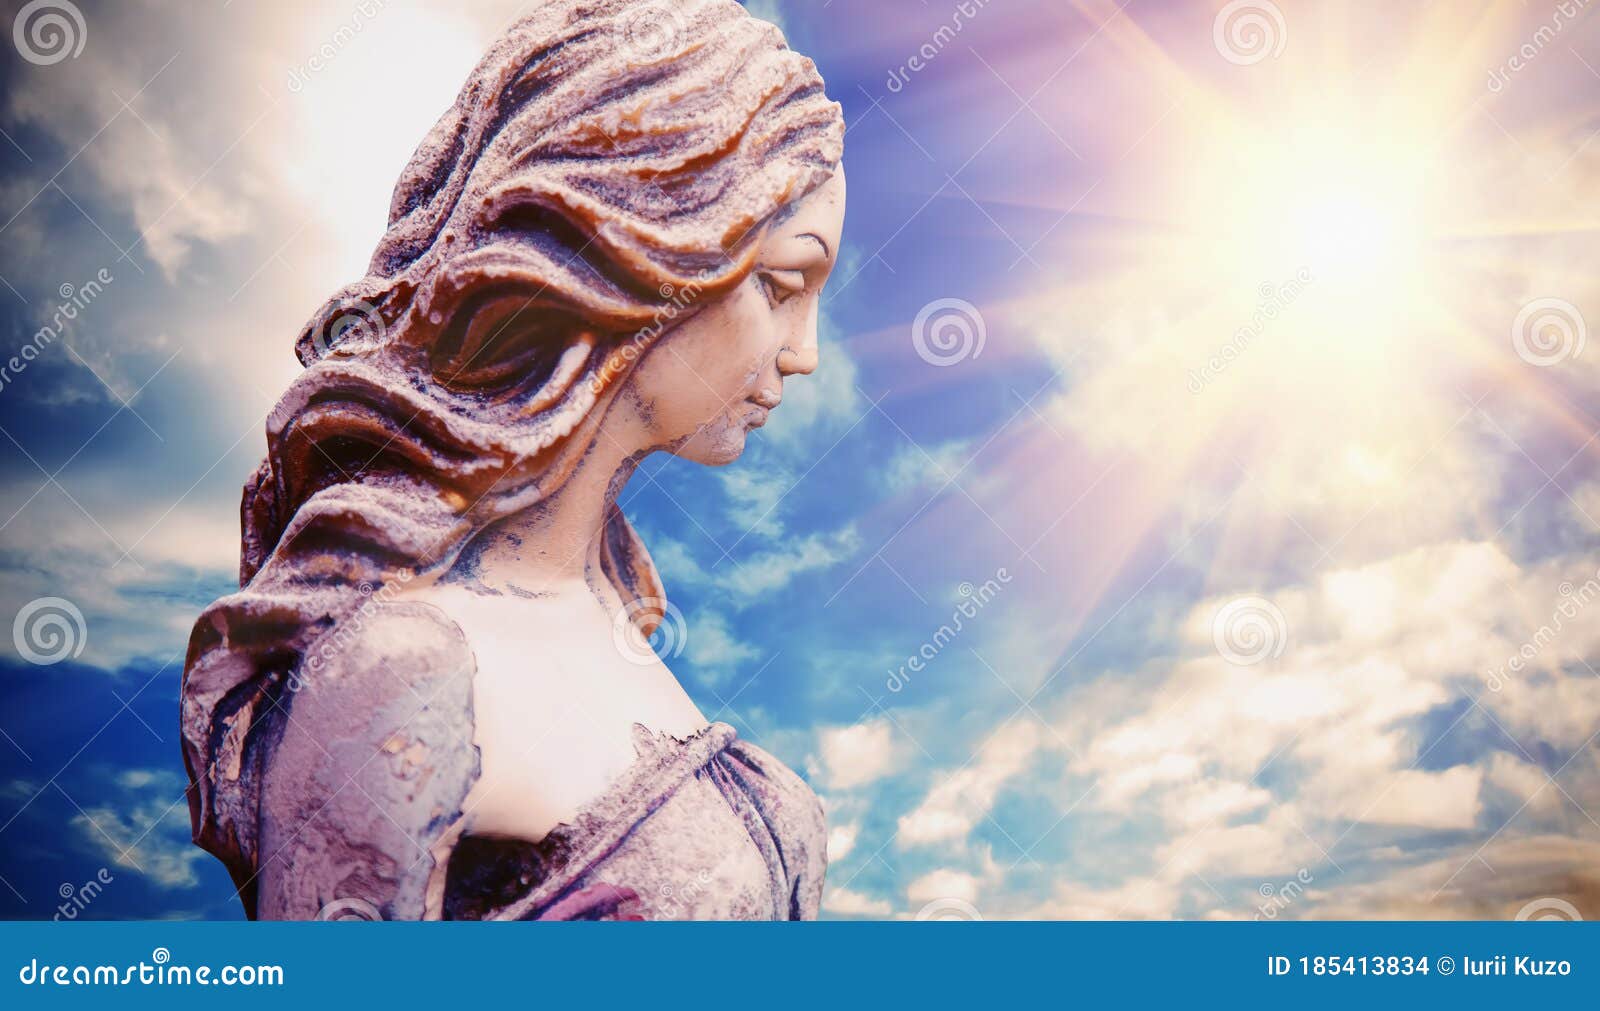 olympic goddess of love and beauty in antique mythology aphrodite venus. ancient statue against dramatic view of sky